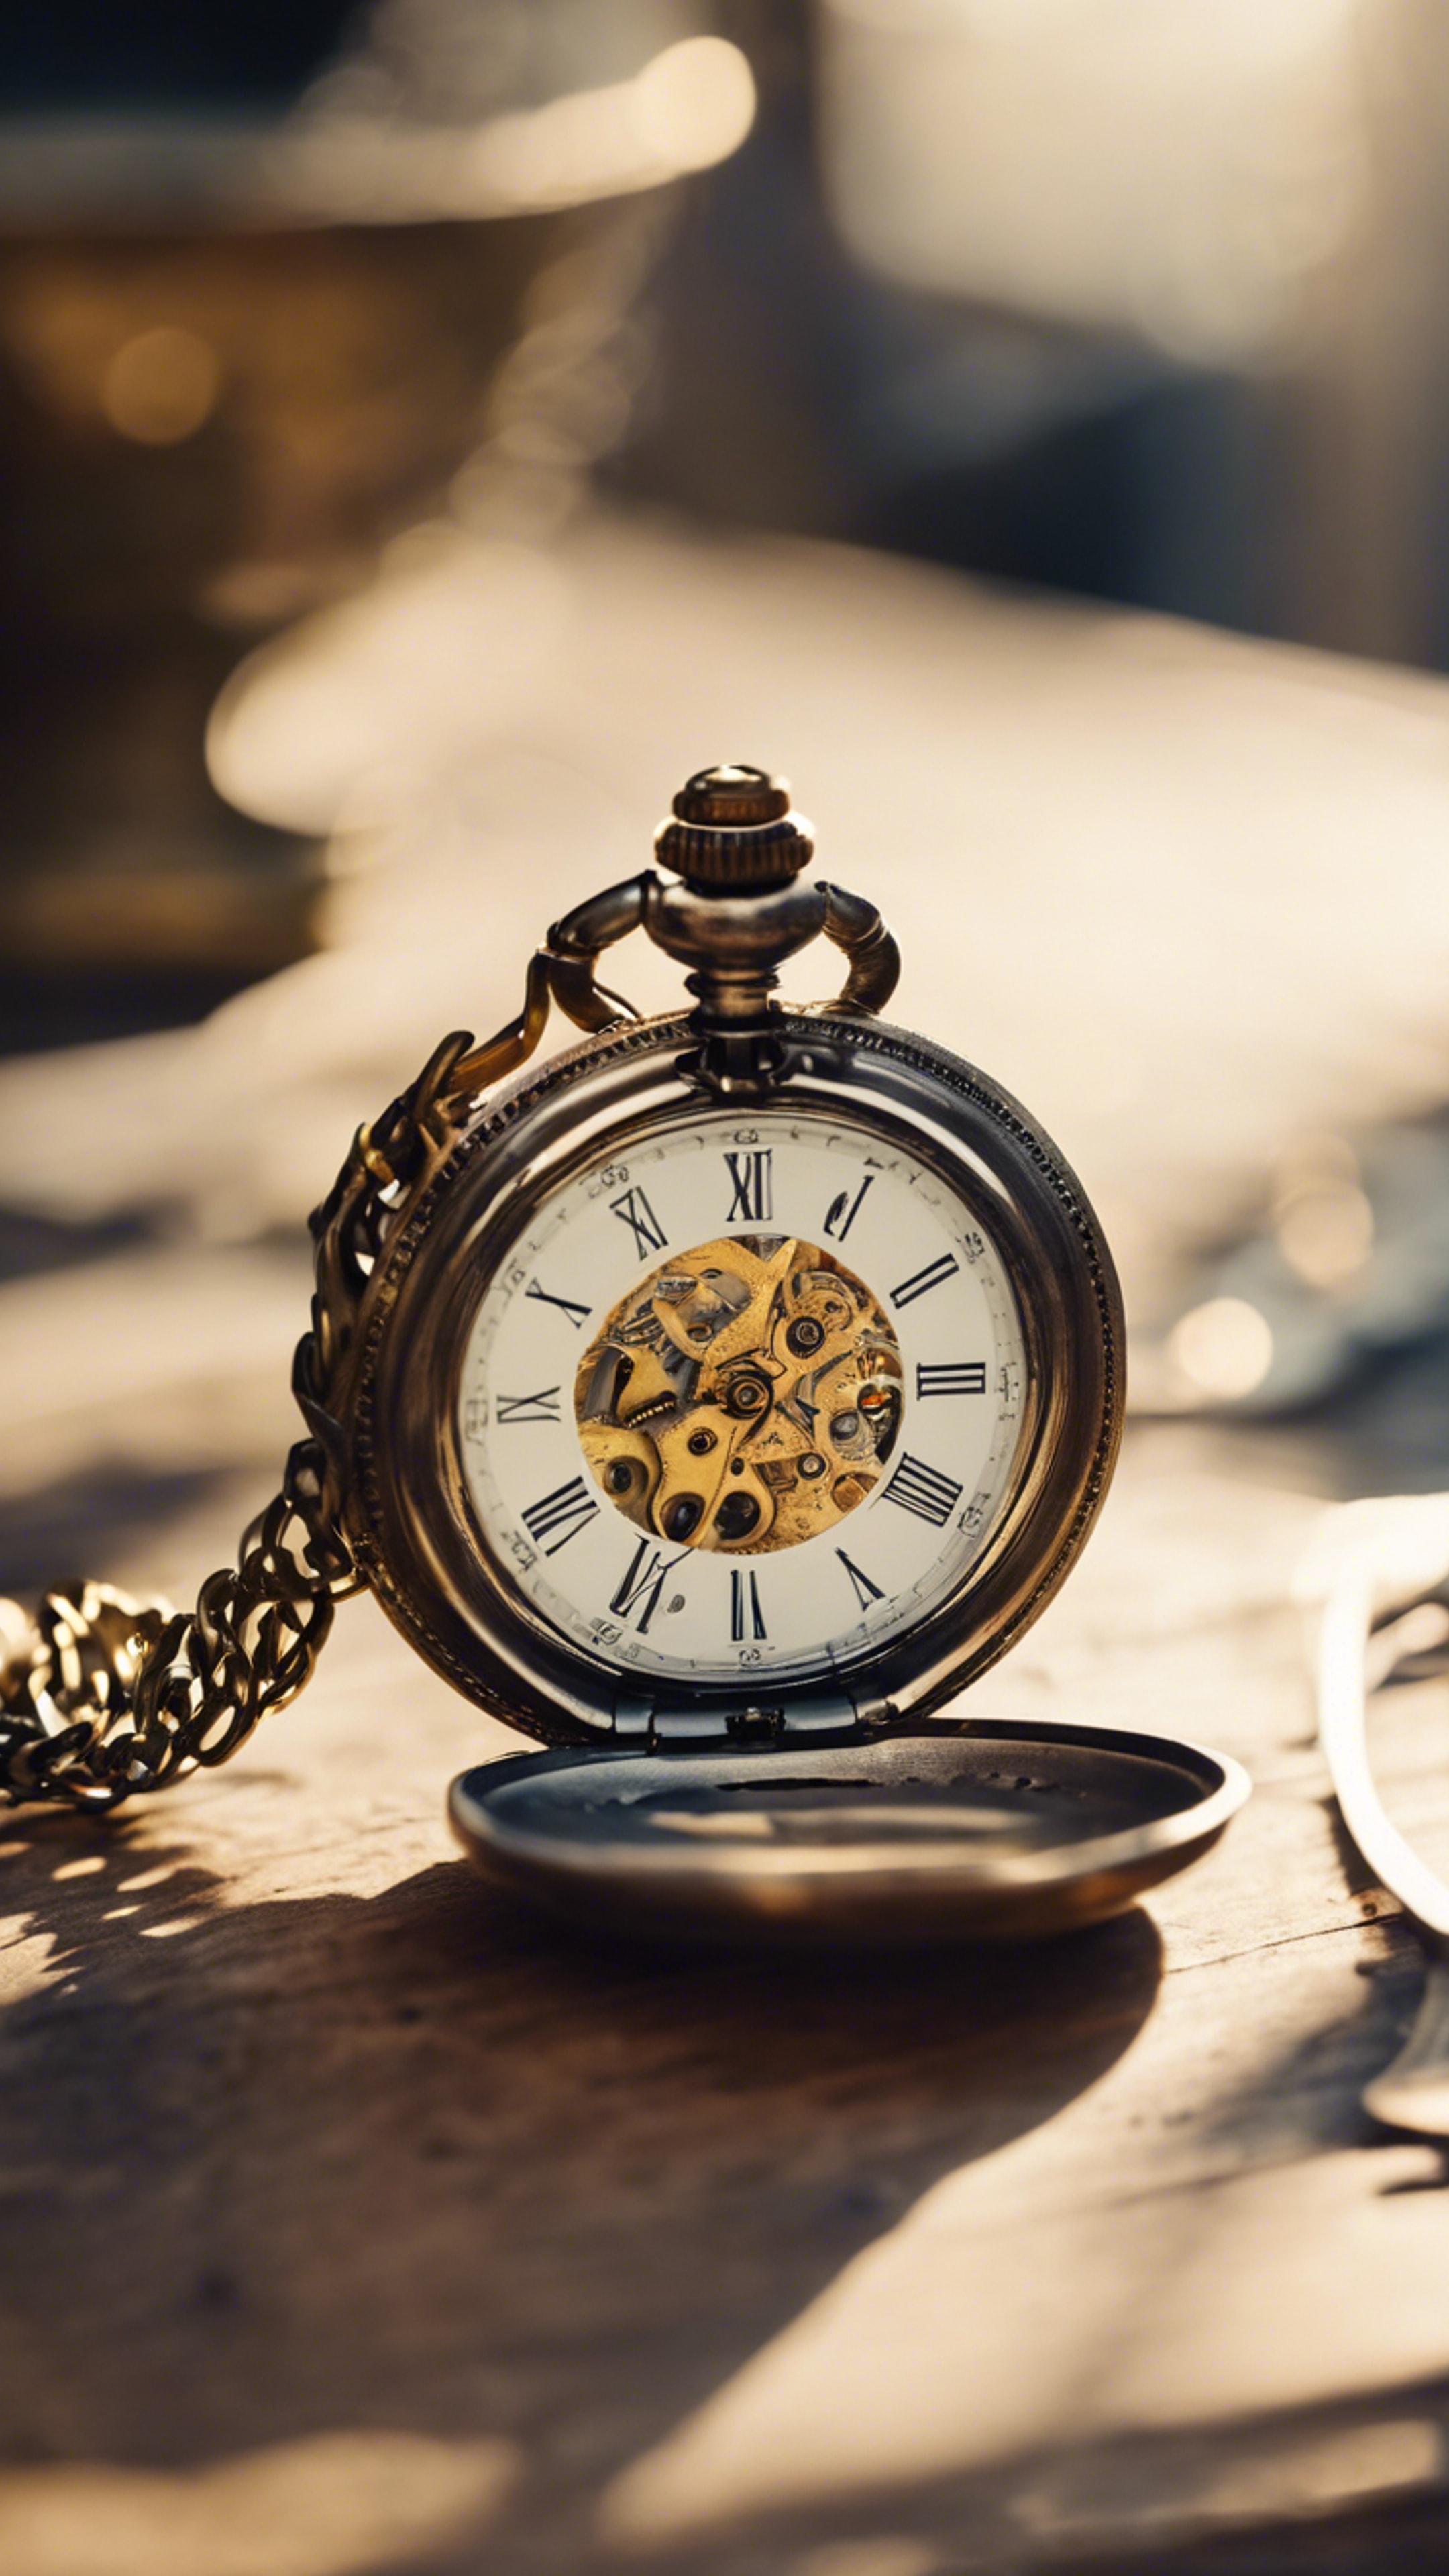 A vintage pocket watch, lying open on an antique table, reflecting the golden rays of afternoon sun. Wallpaper[0f0622e1f4f2468db79b]